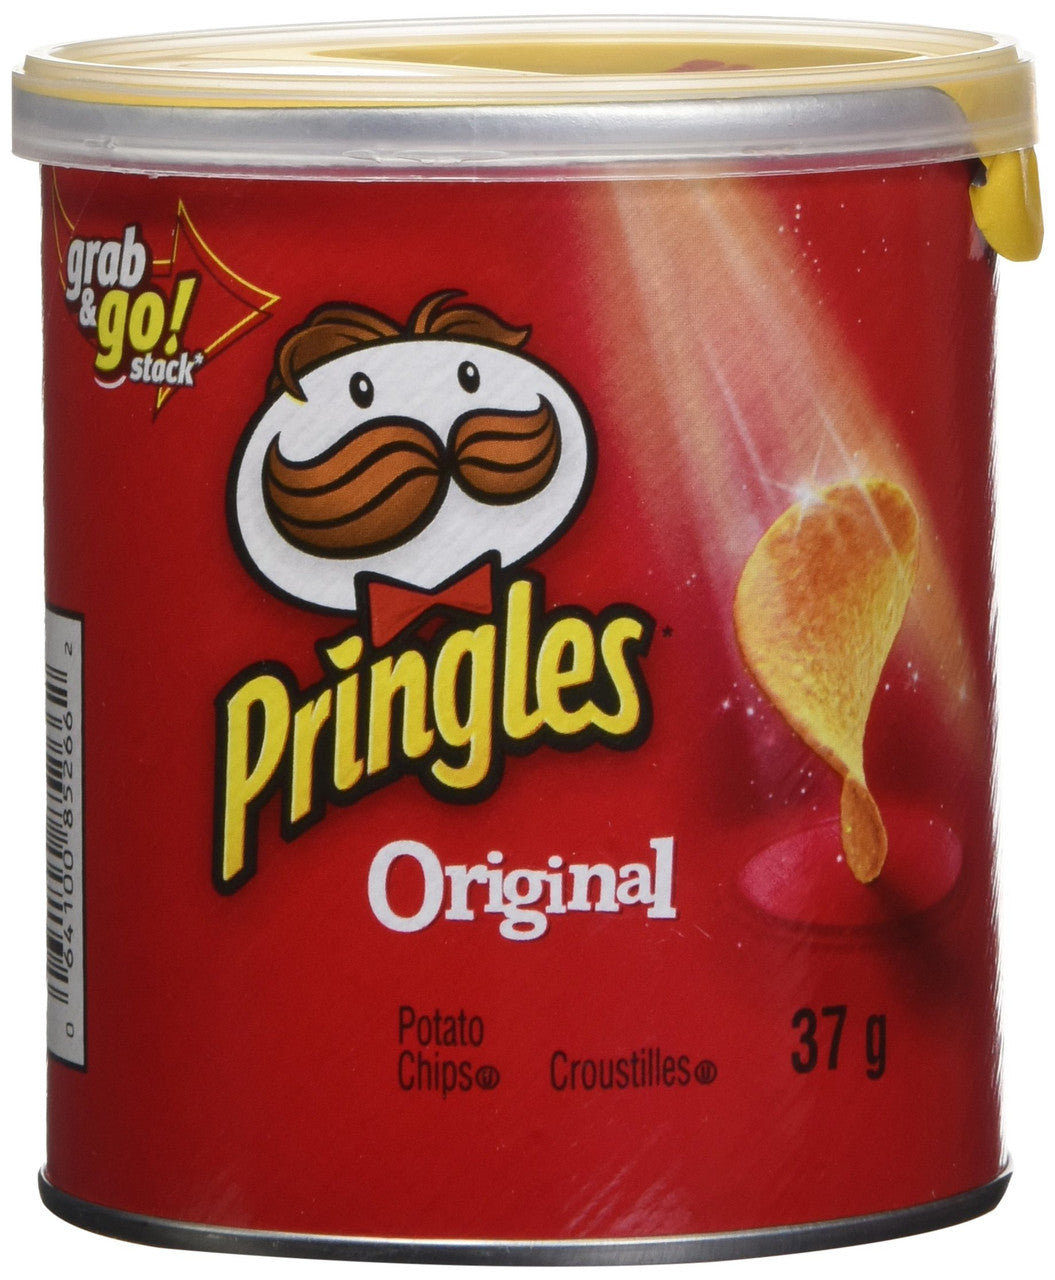 Pringles Original Potato Chips 37g/1.3oz., (Pack of 12) {Imported from Canada}